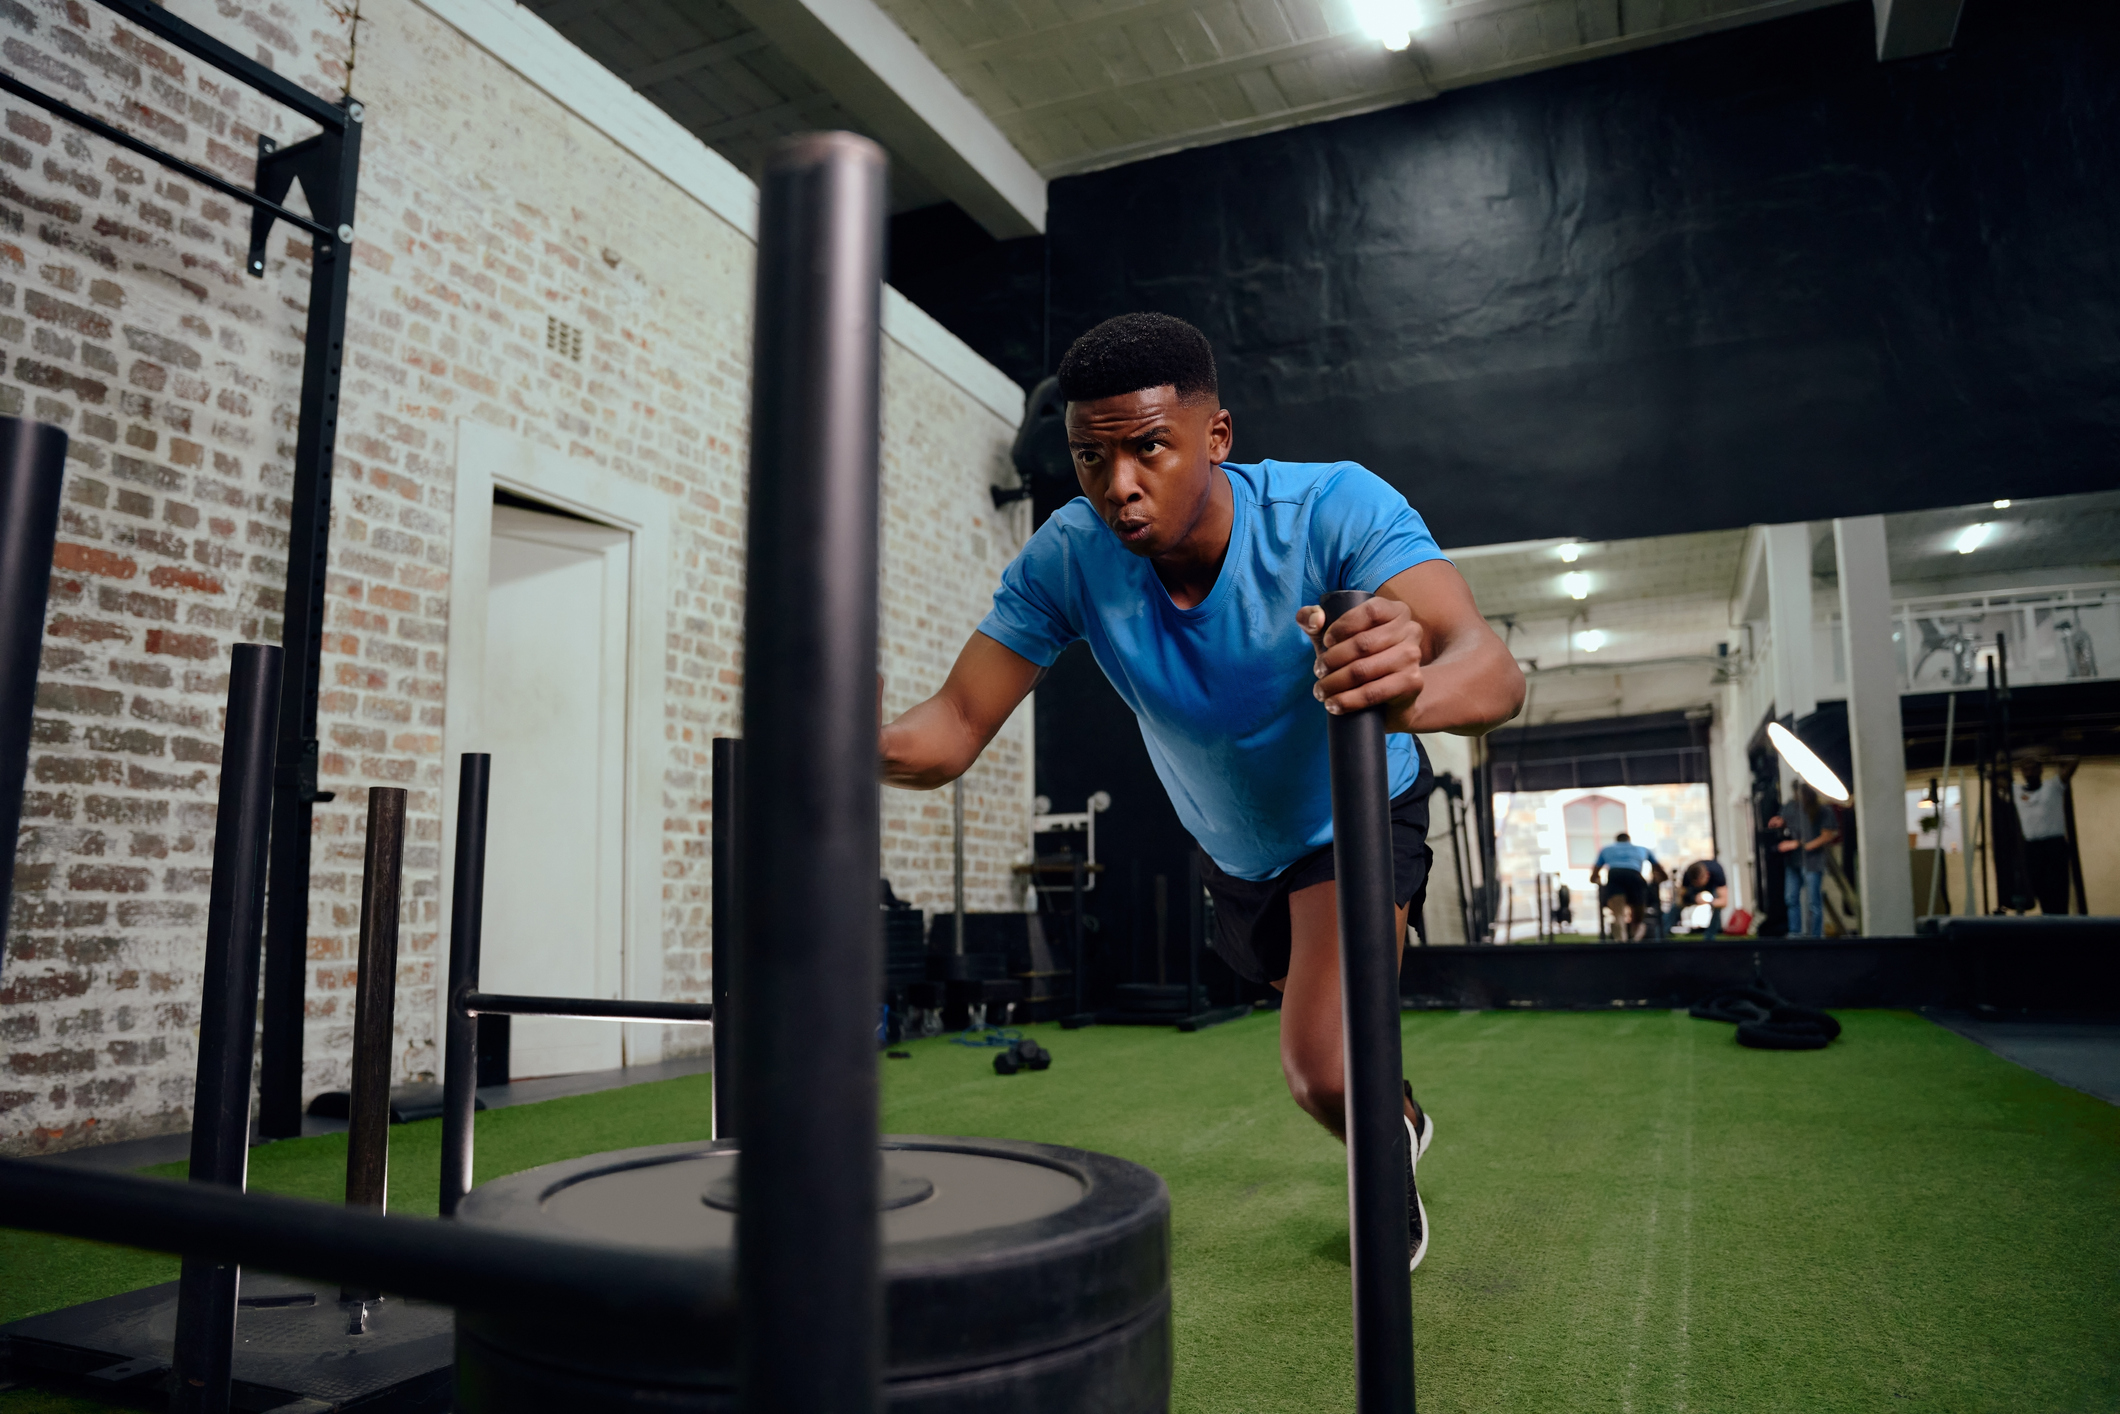 A young black man performs a sled push exercise at a gym.